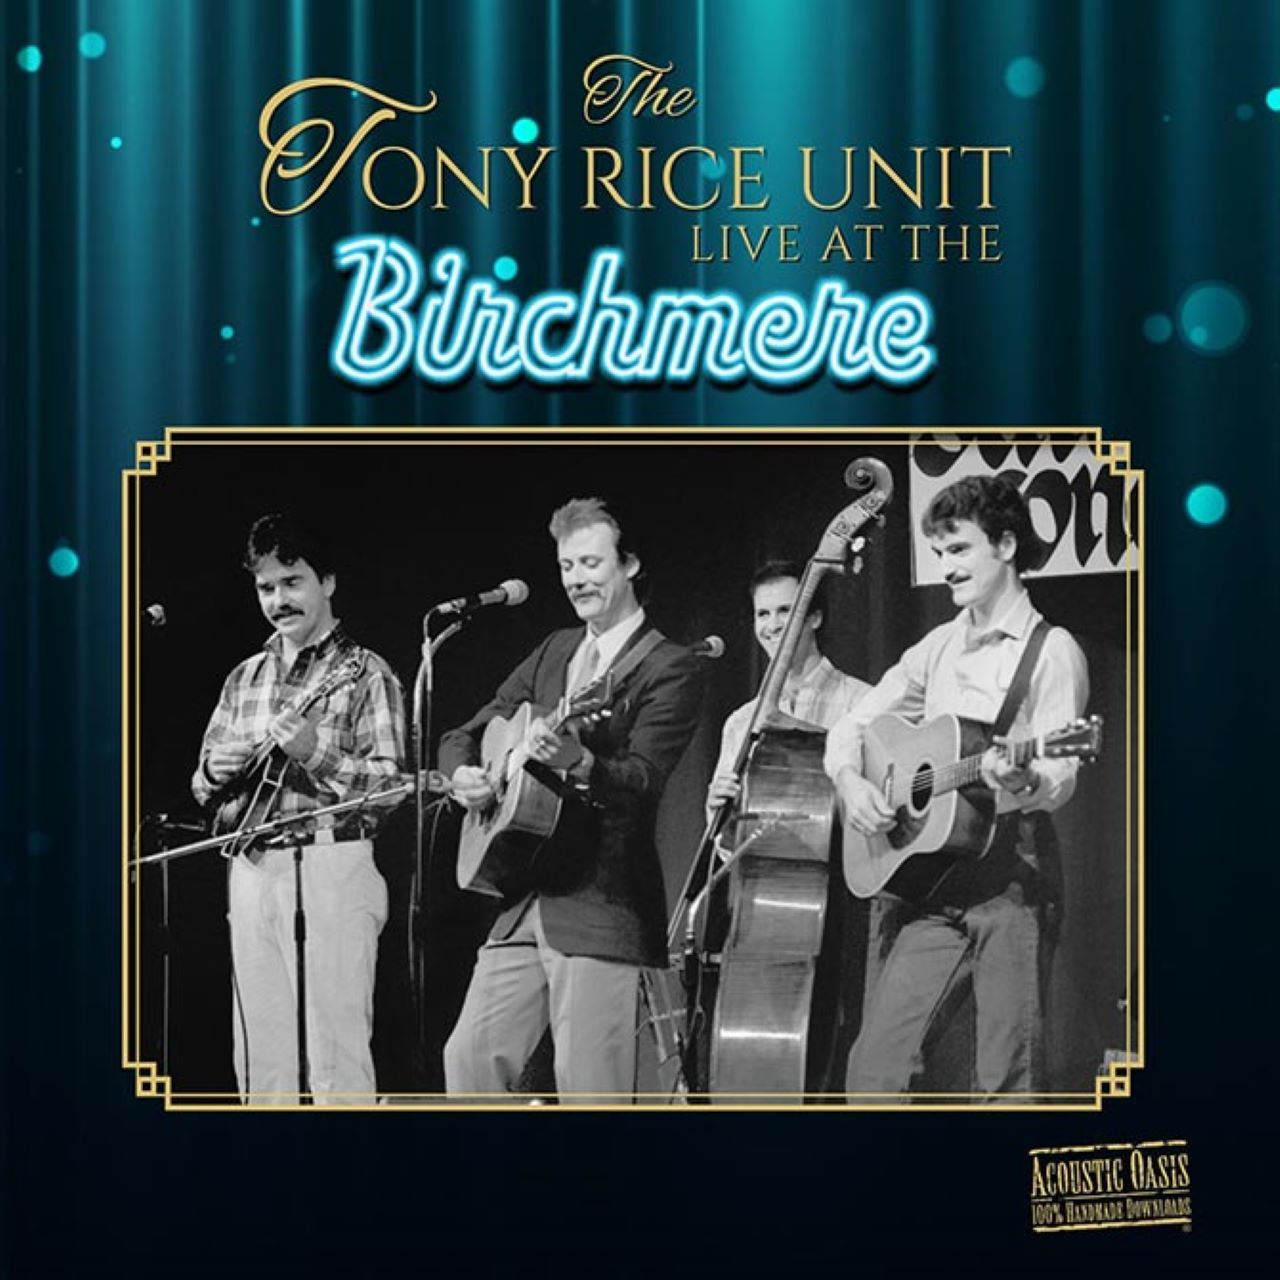 The Tony Rice Unit Live at the Birchmere cover album